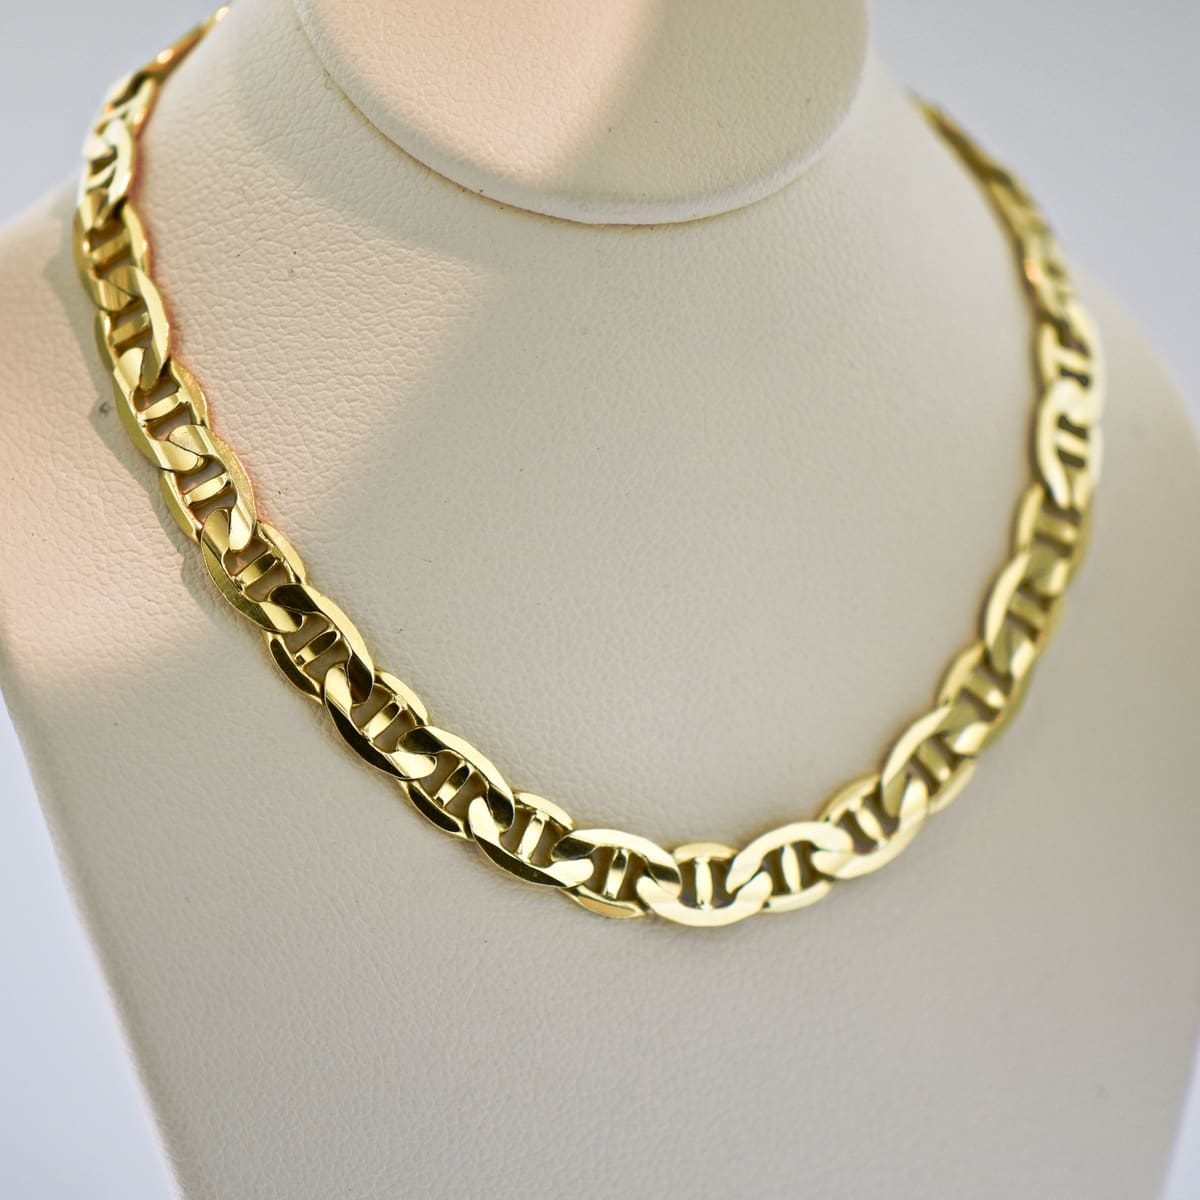 Men Fashion Jewelry Long Necklace Chunky Gold Metal Chain Link